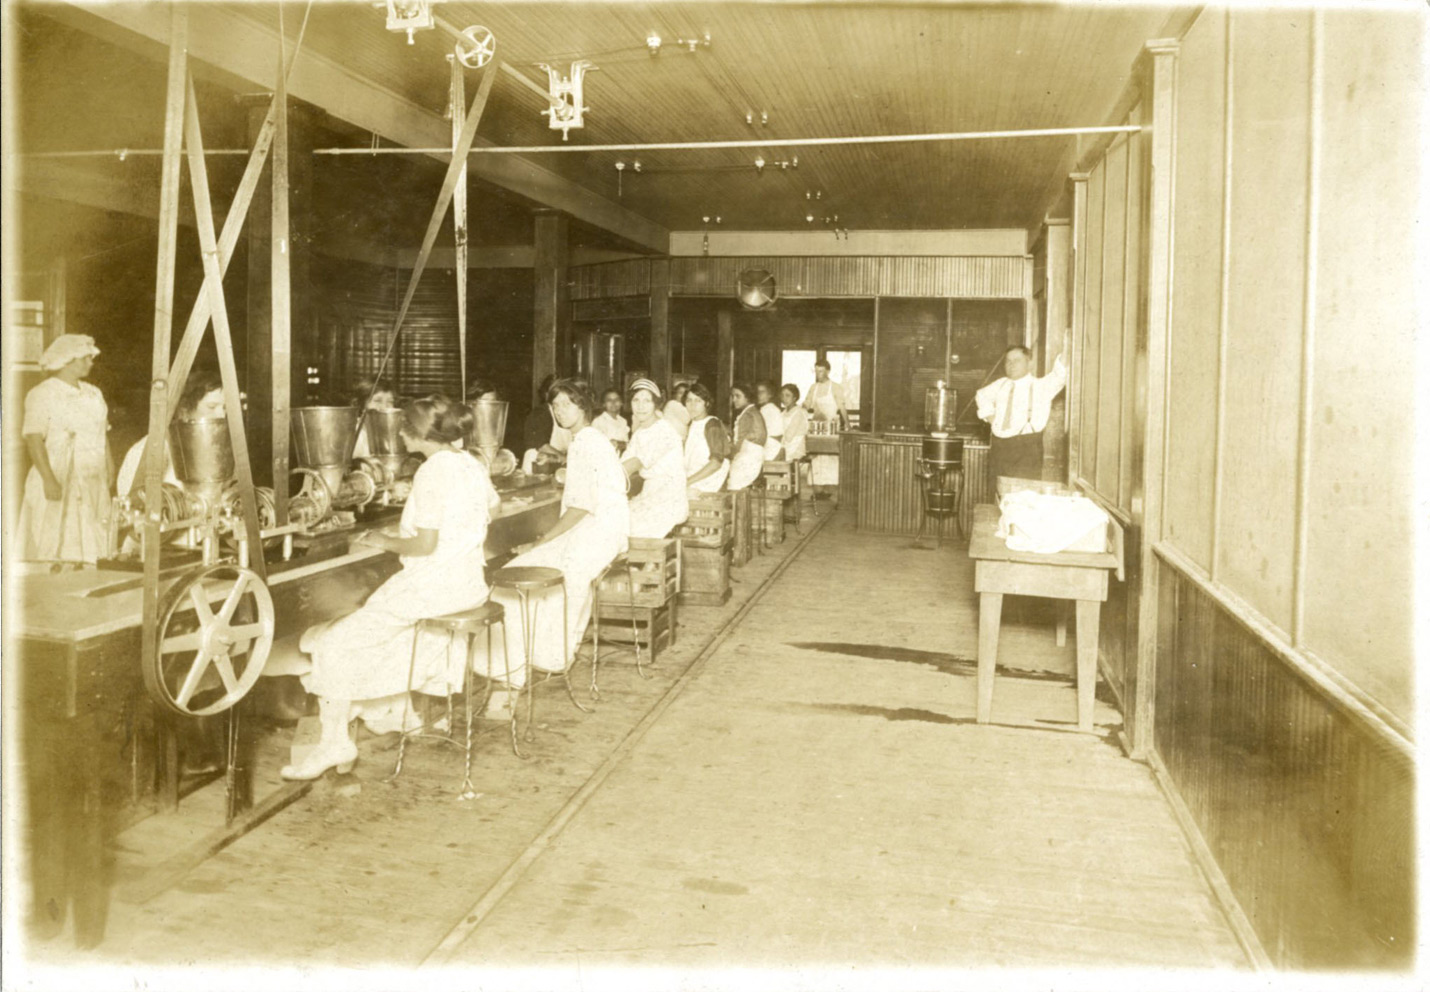 Females working on the chili powder packaging assembly line.